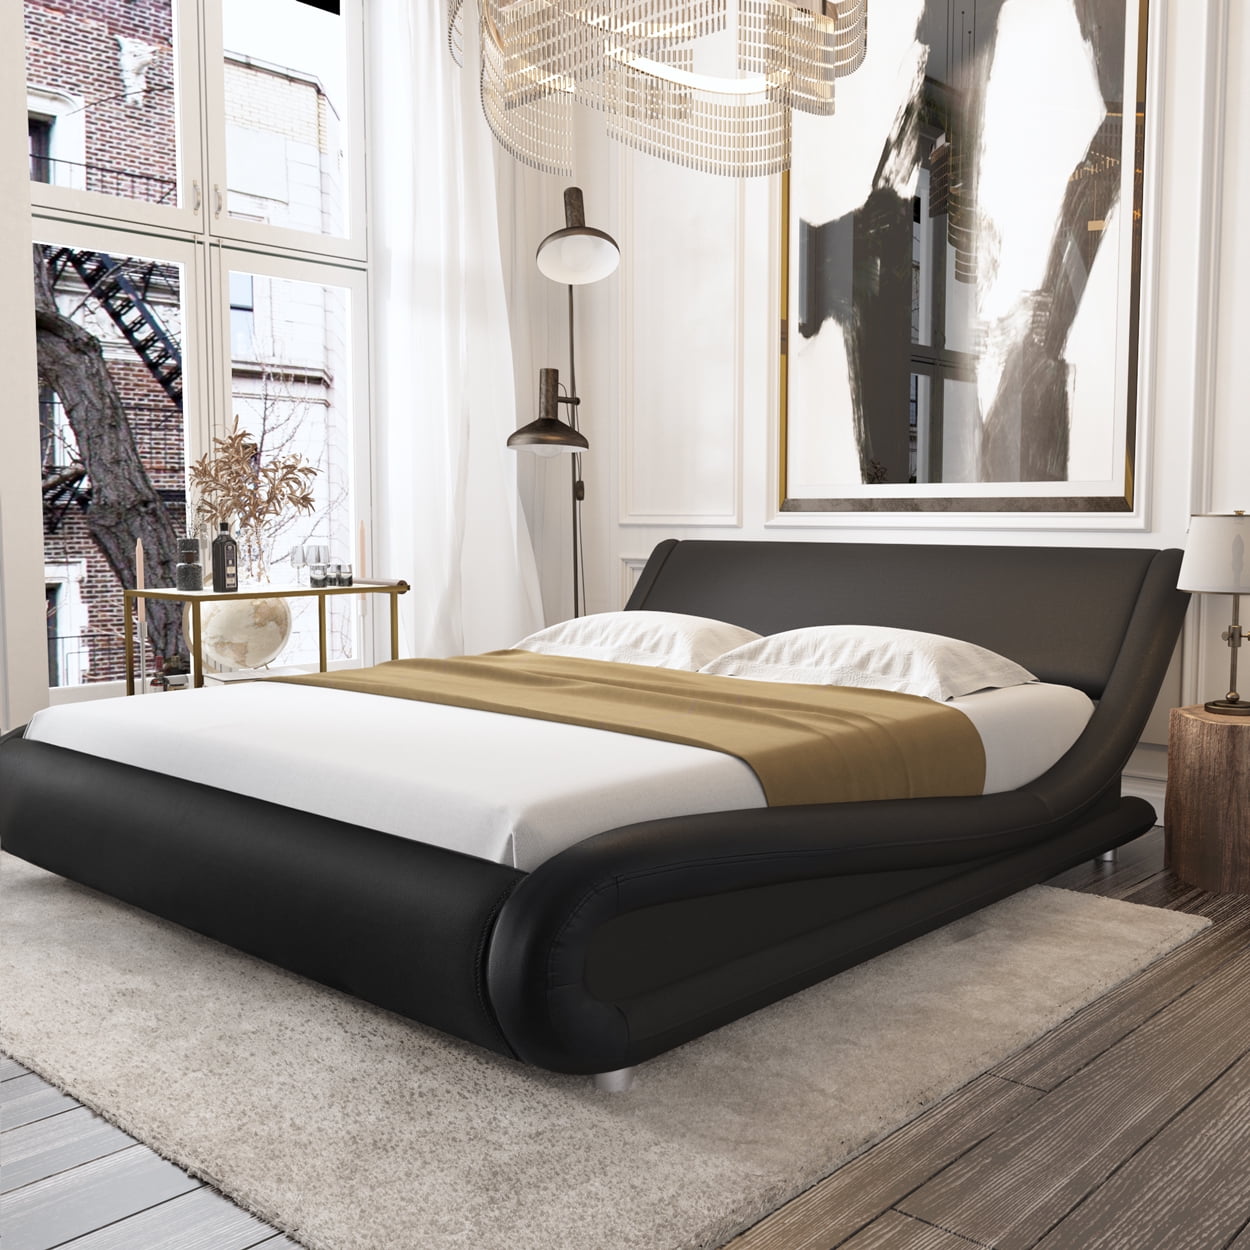 Amolife King Size Bed Frame With Curved, Black Leather Headboard King Size